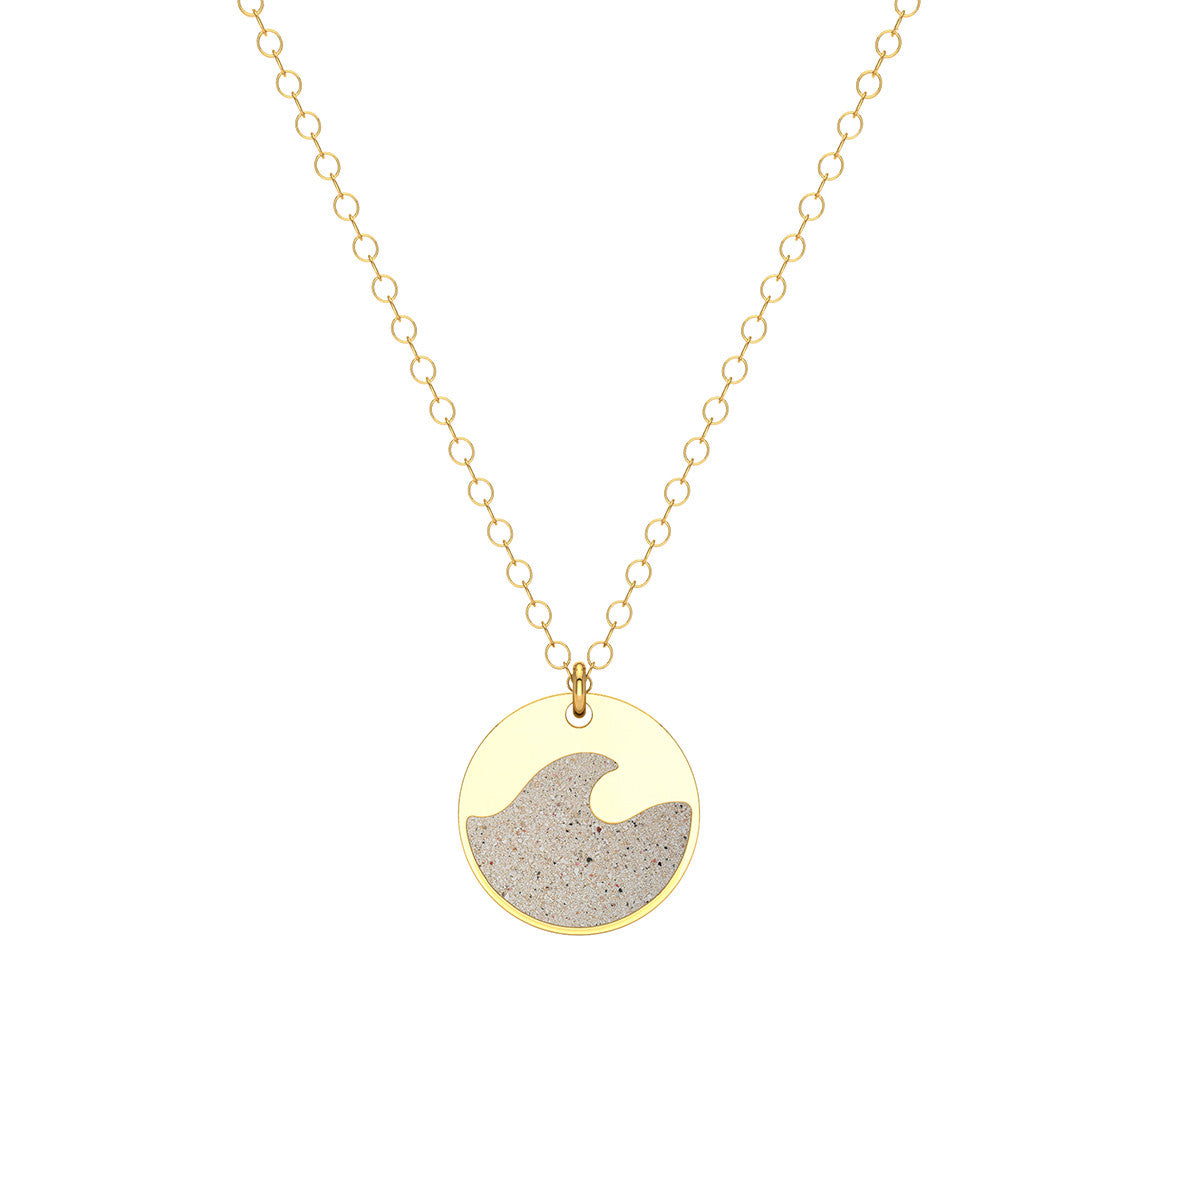 Ola Necklace - Gold